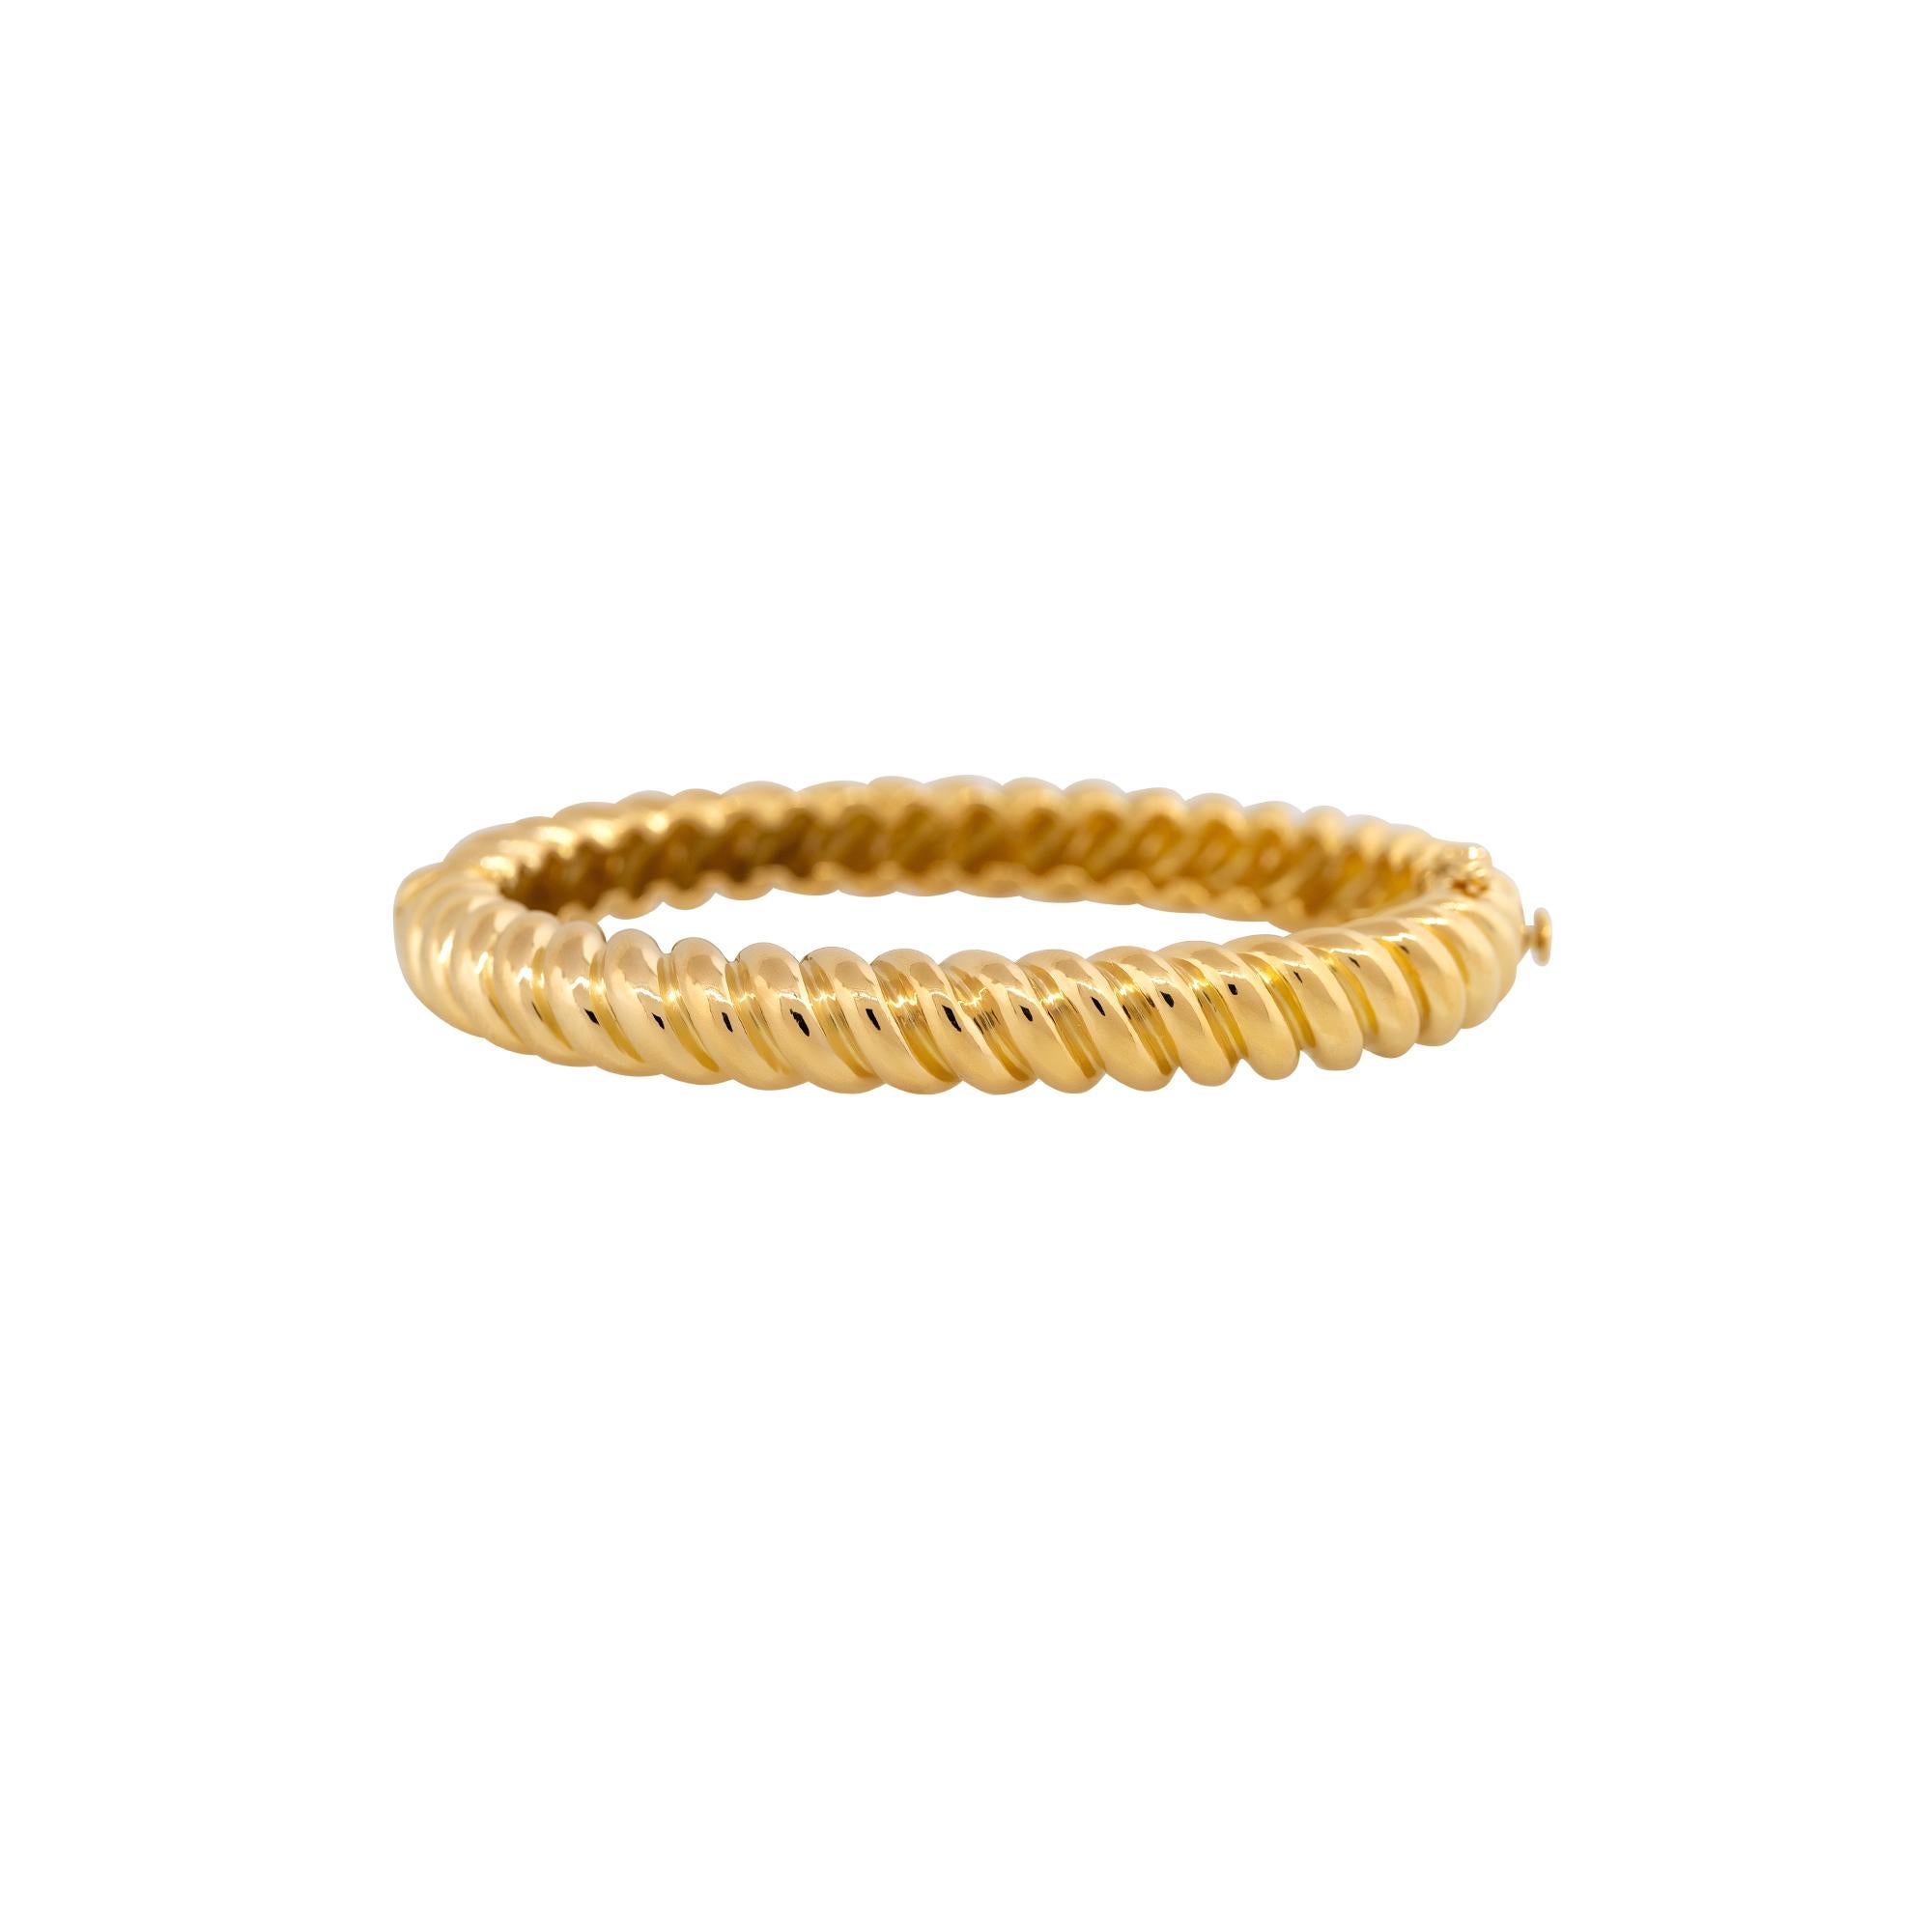 Oval Shaped Ribbed Bangle Bracelet 18 Karat In Stock In Excellent Condition For Sale In Boca Raton, FL